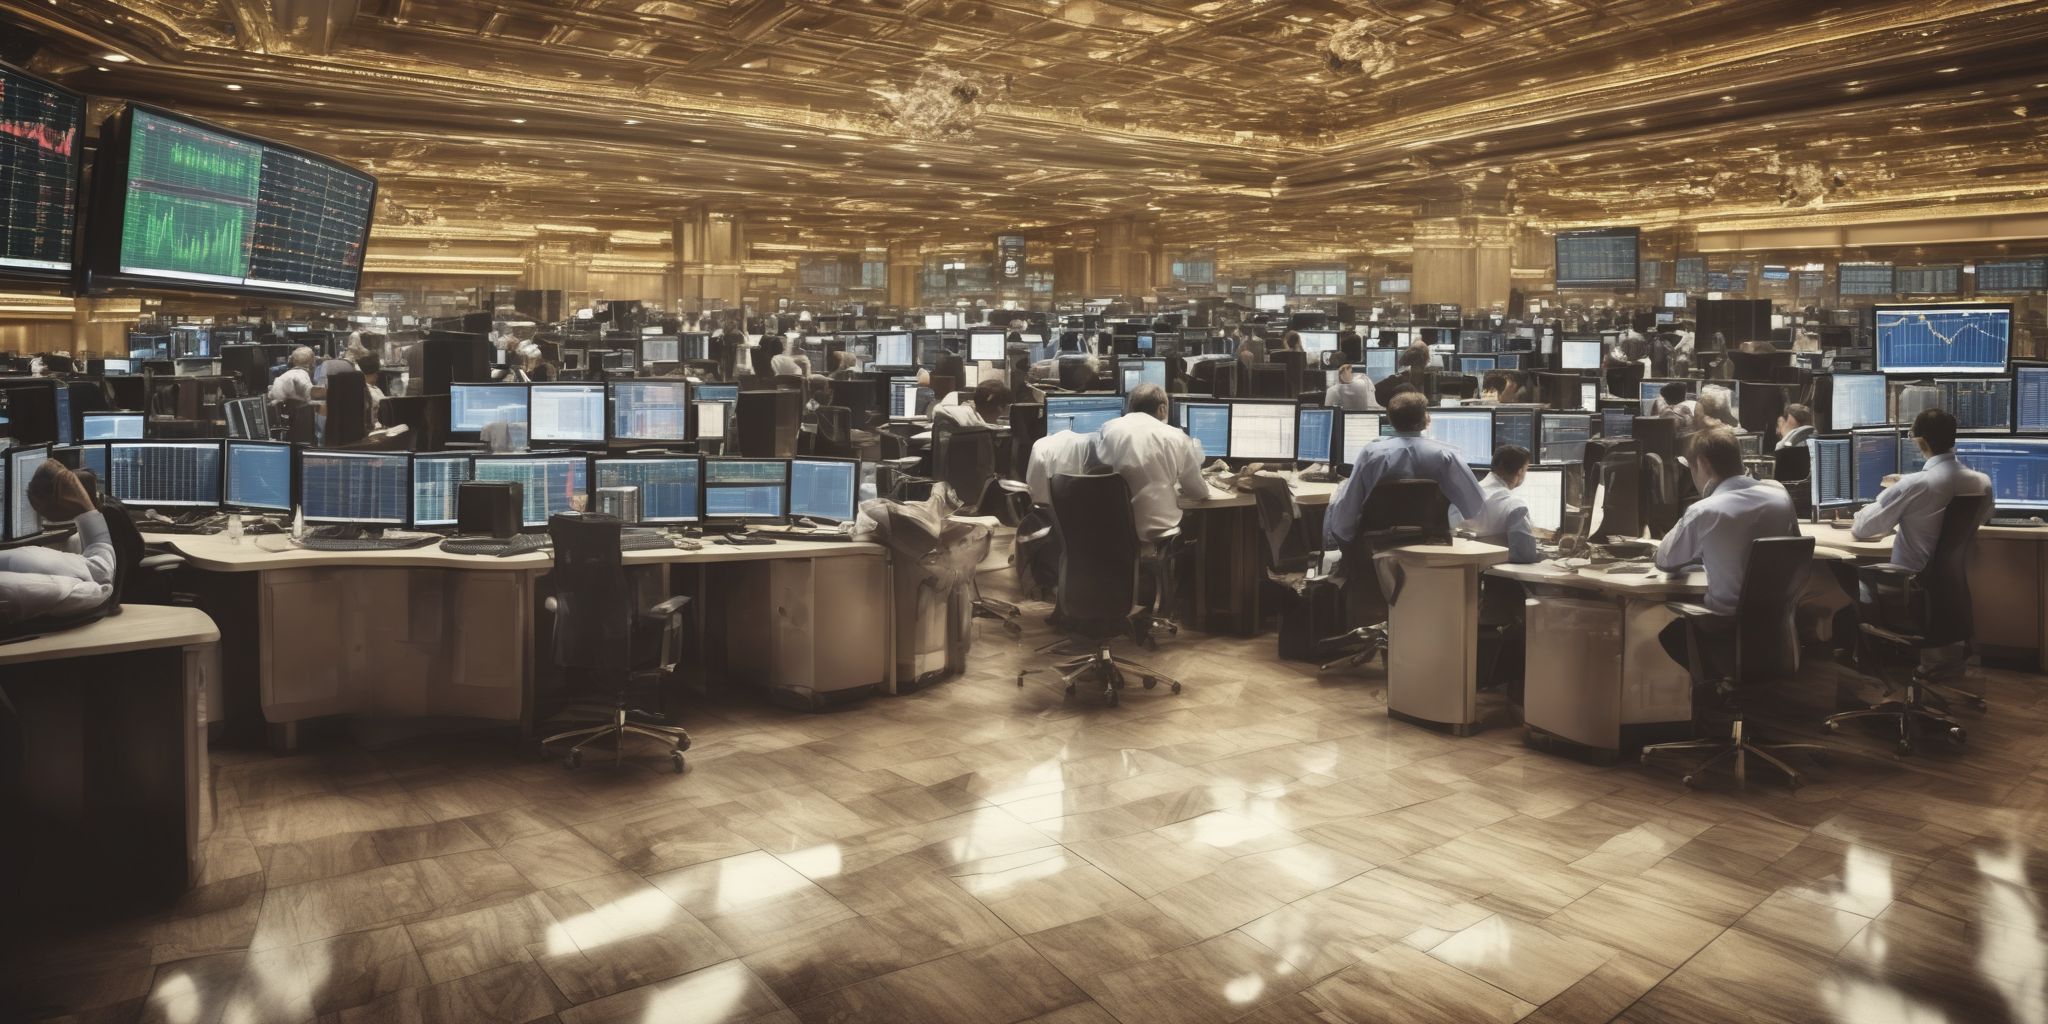 Stock market  in realistic, photographic style